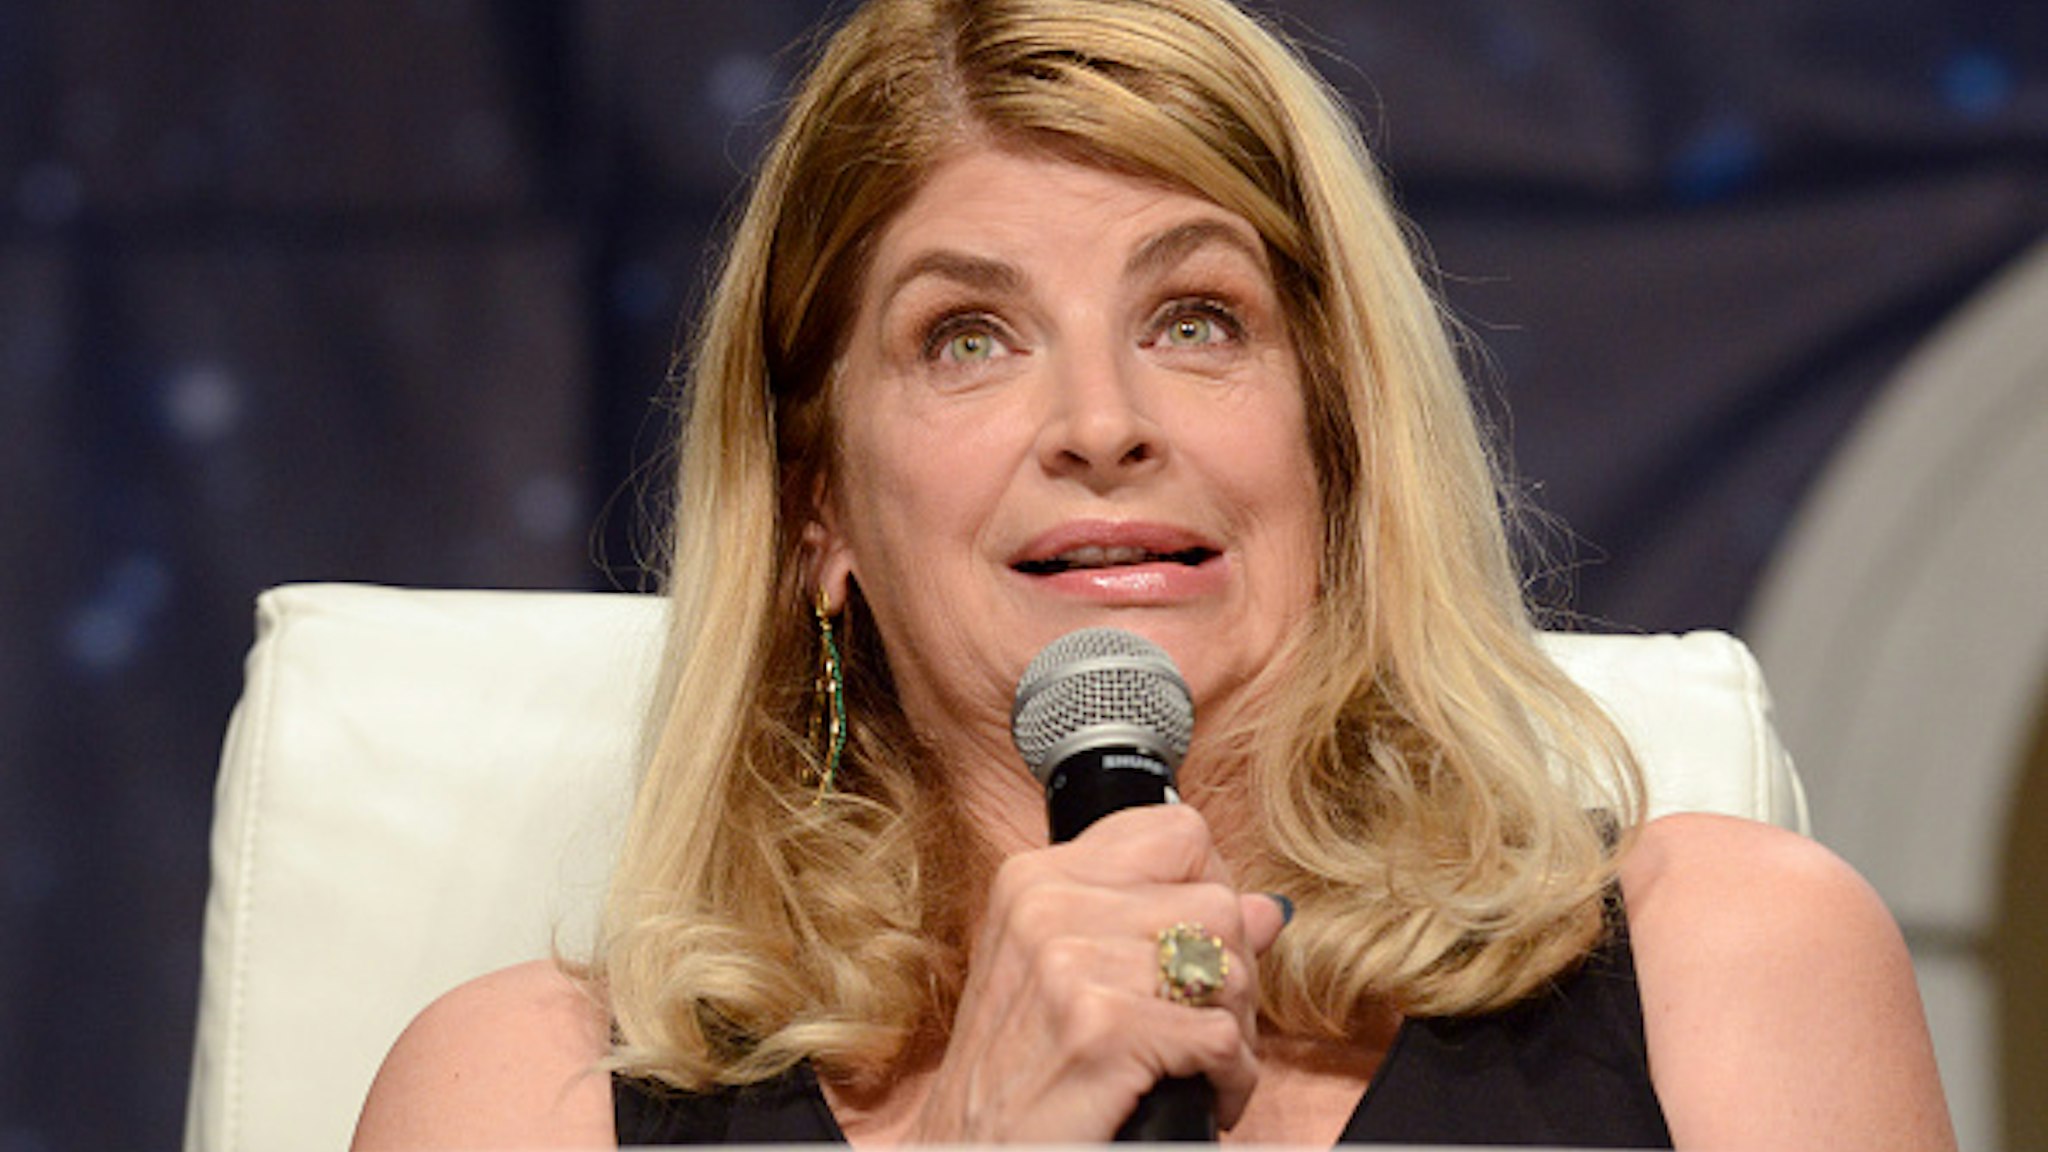 LAS VEGAS, NV - AUGUST 05: Actress Kirstie Alley on day 3 of Creation Entertainment's Official Star Trek 50th Anniversary Convention at the Rio Hotel &amp; Casino on August 5, 2016 in Las Vegas, Nevada.